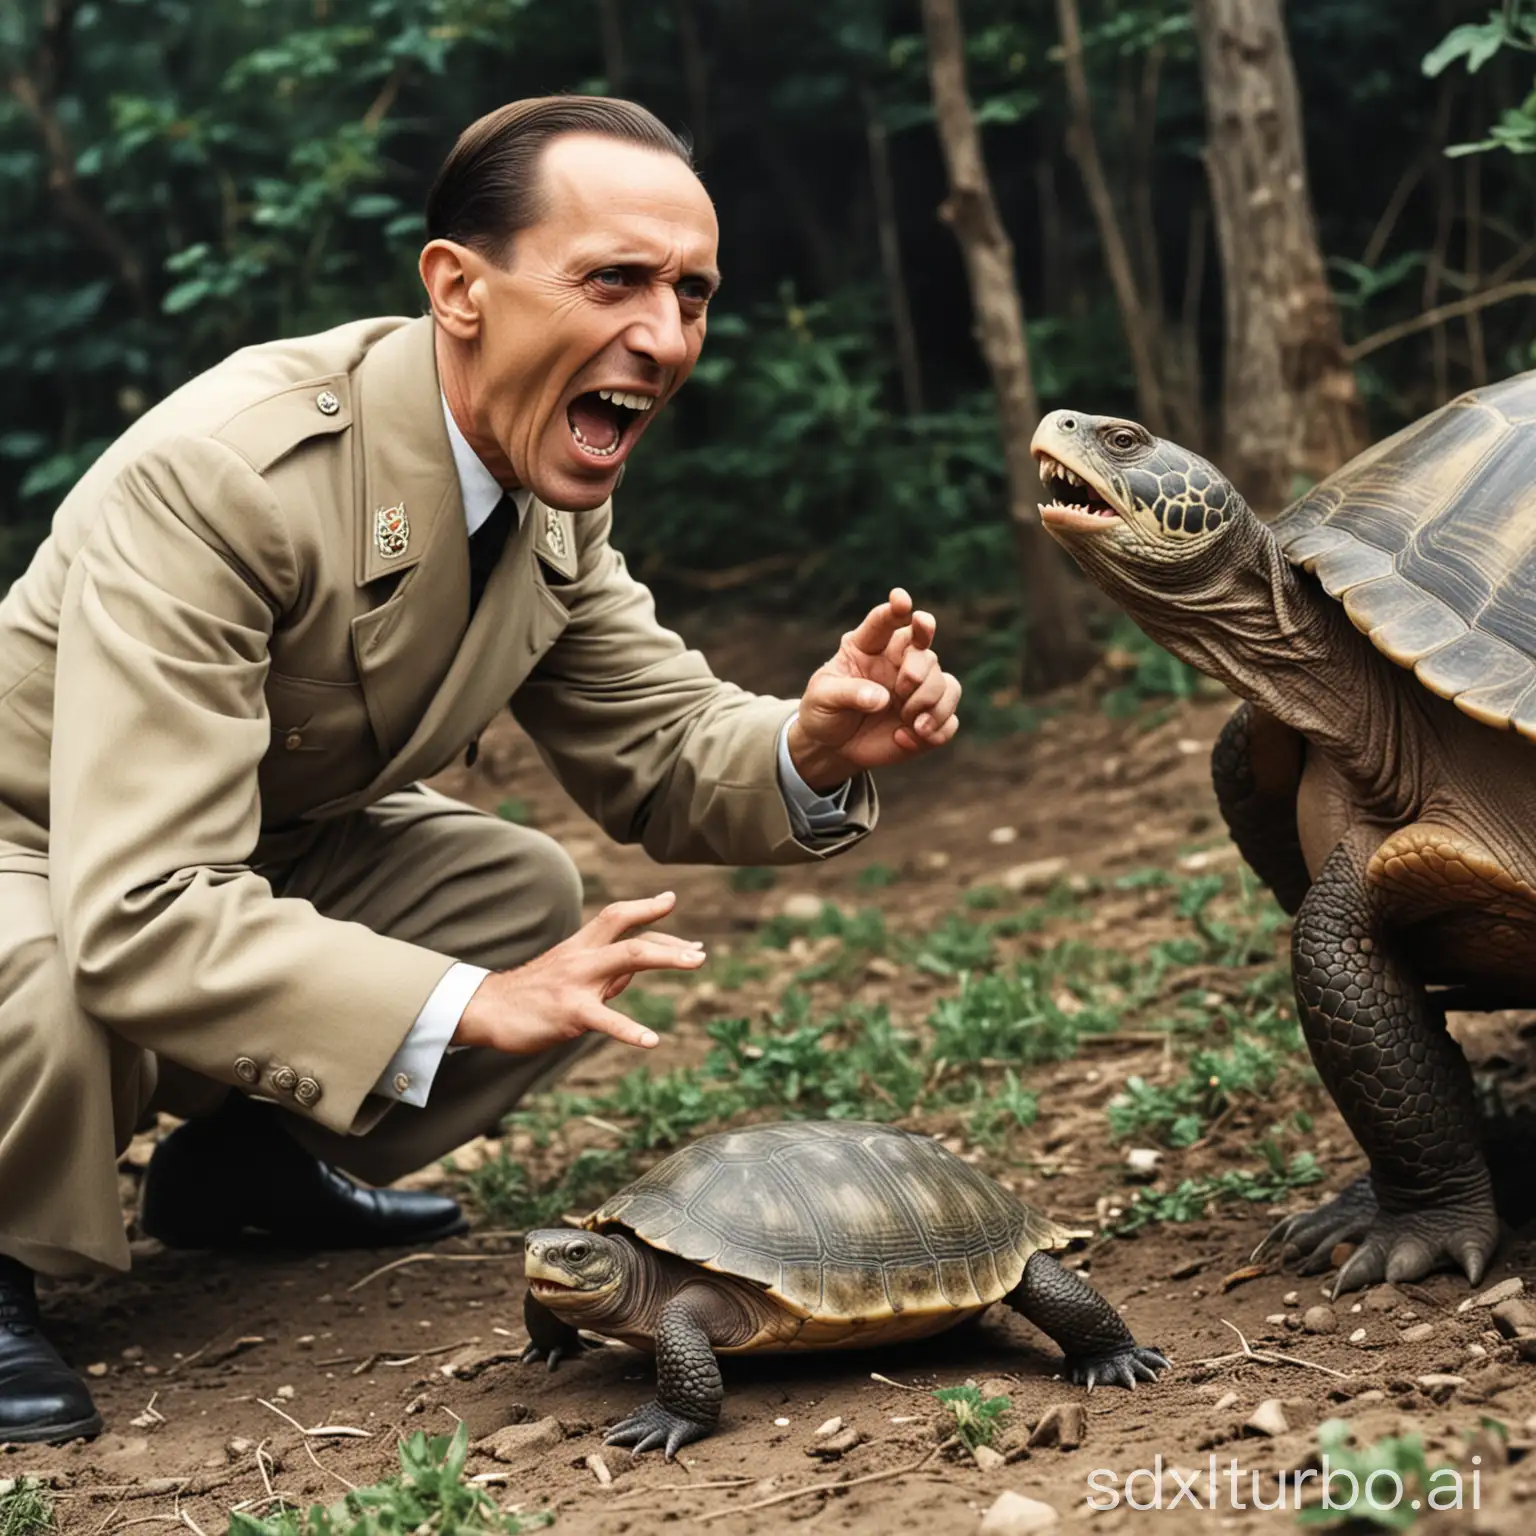 old color photo of joseph goebbels screaming as he is getting his finger bit by a turtle